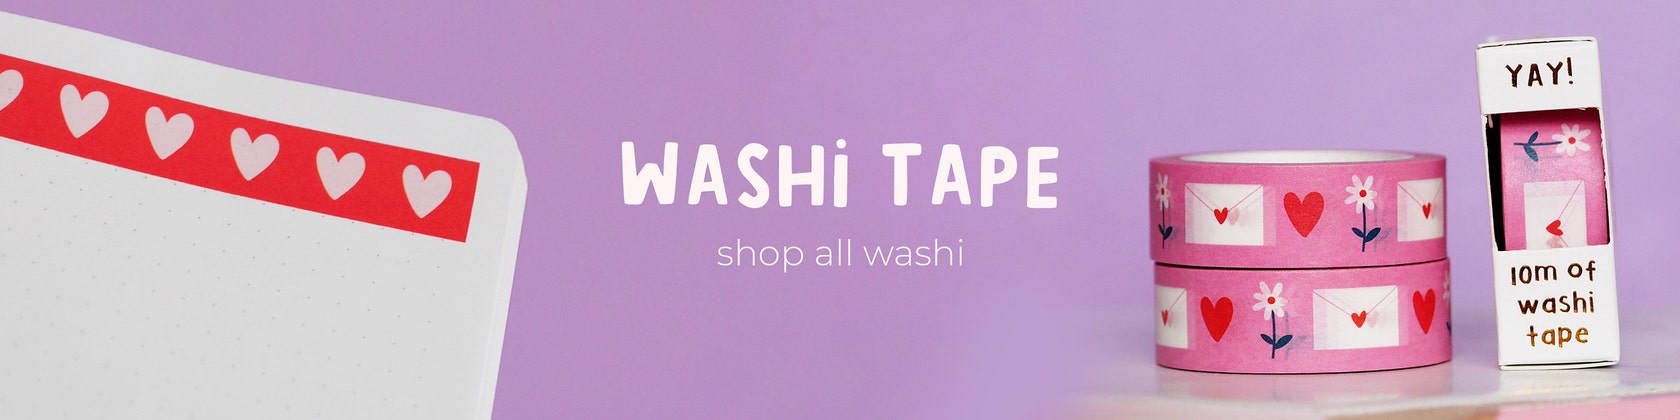 Buy Suck UK, Space Washi Tape, Arts & Crafts Tapes, Scrapbooking  Supplies & Journaling Supplies, Aesthetic Stationary For School or Office, Wall Safe Tape for Decorations